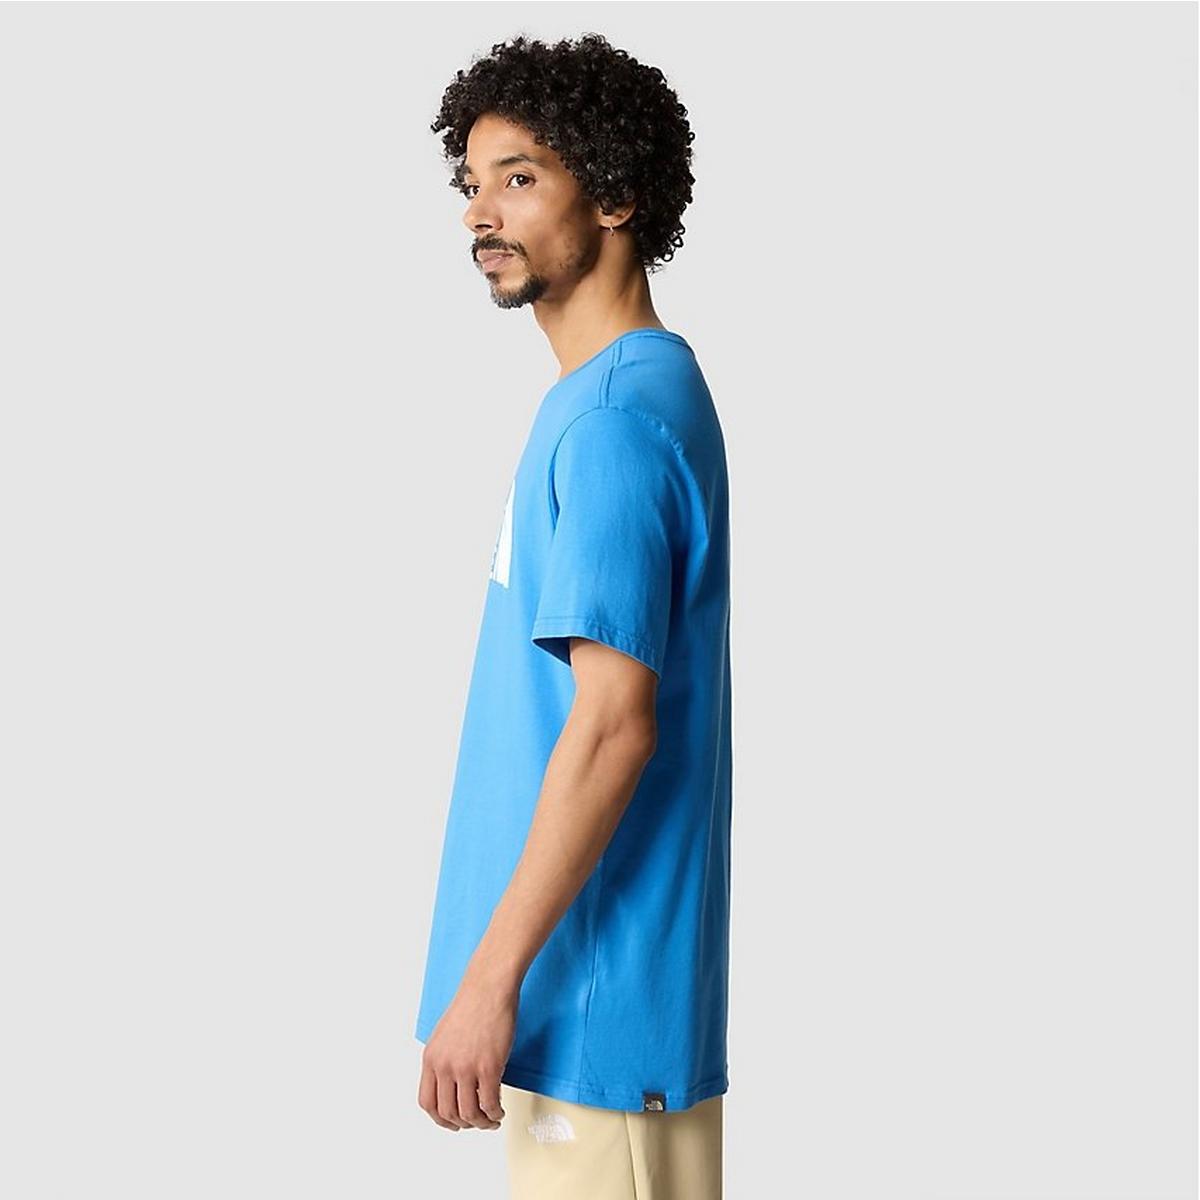 The North Face Men's Short Sleeve Easy Tee - Super Sonic Blue